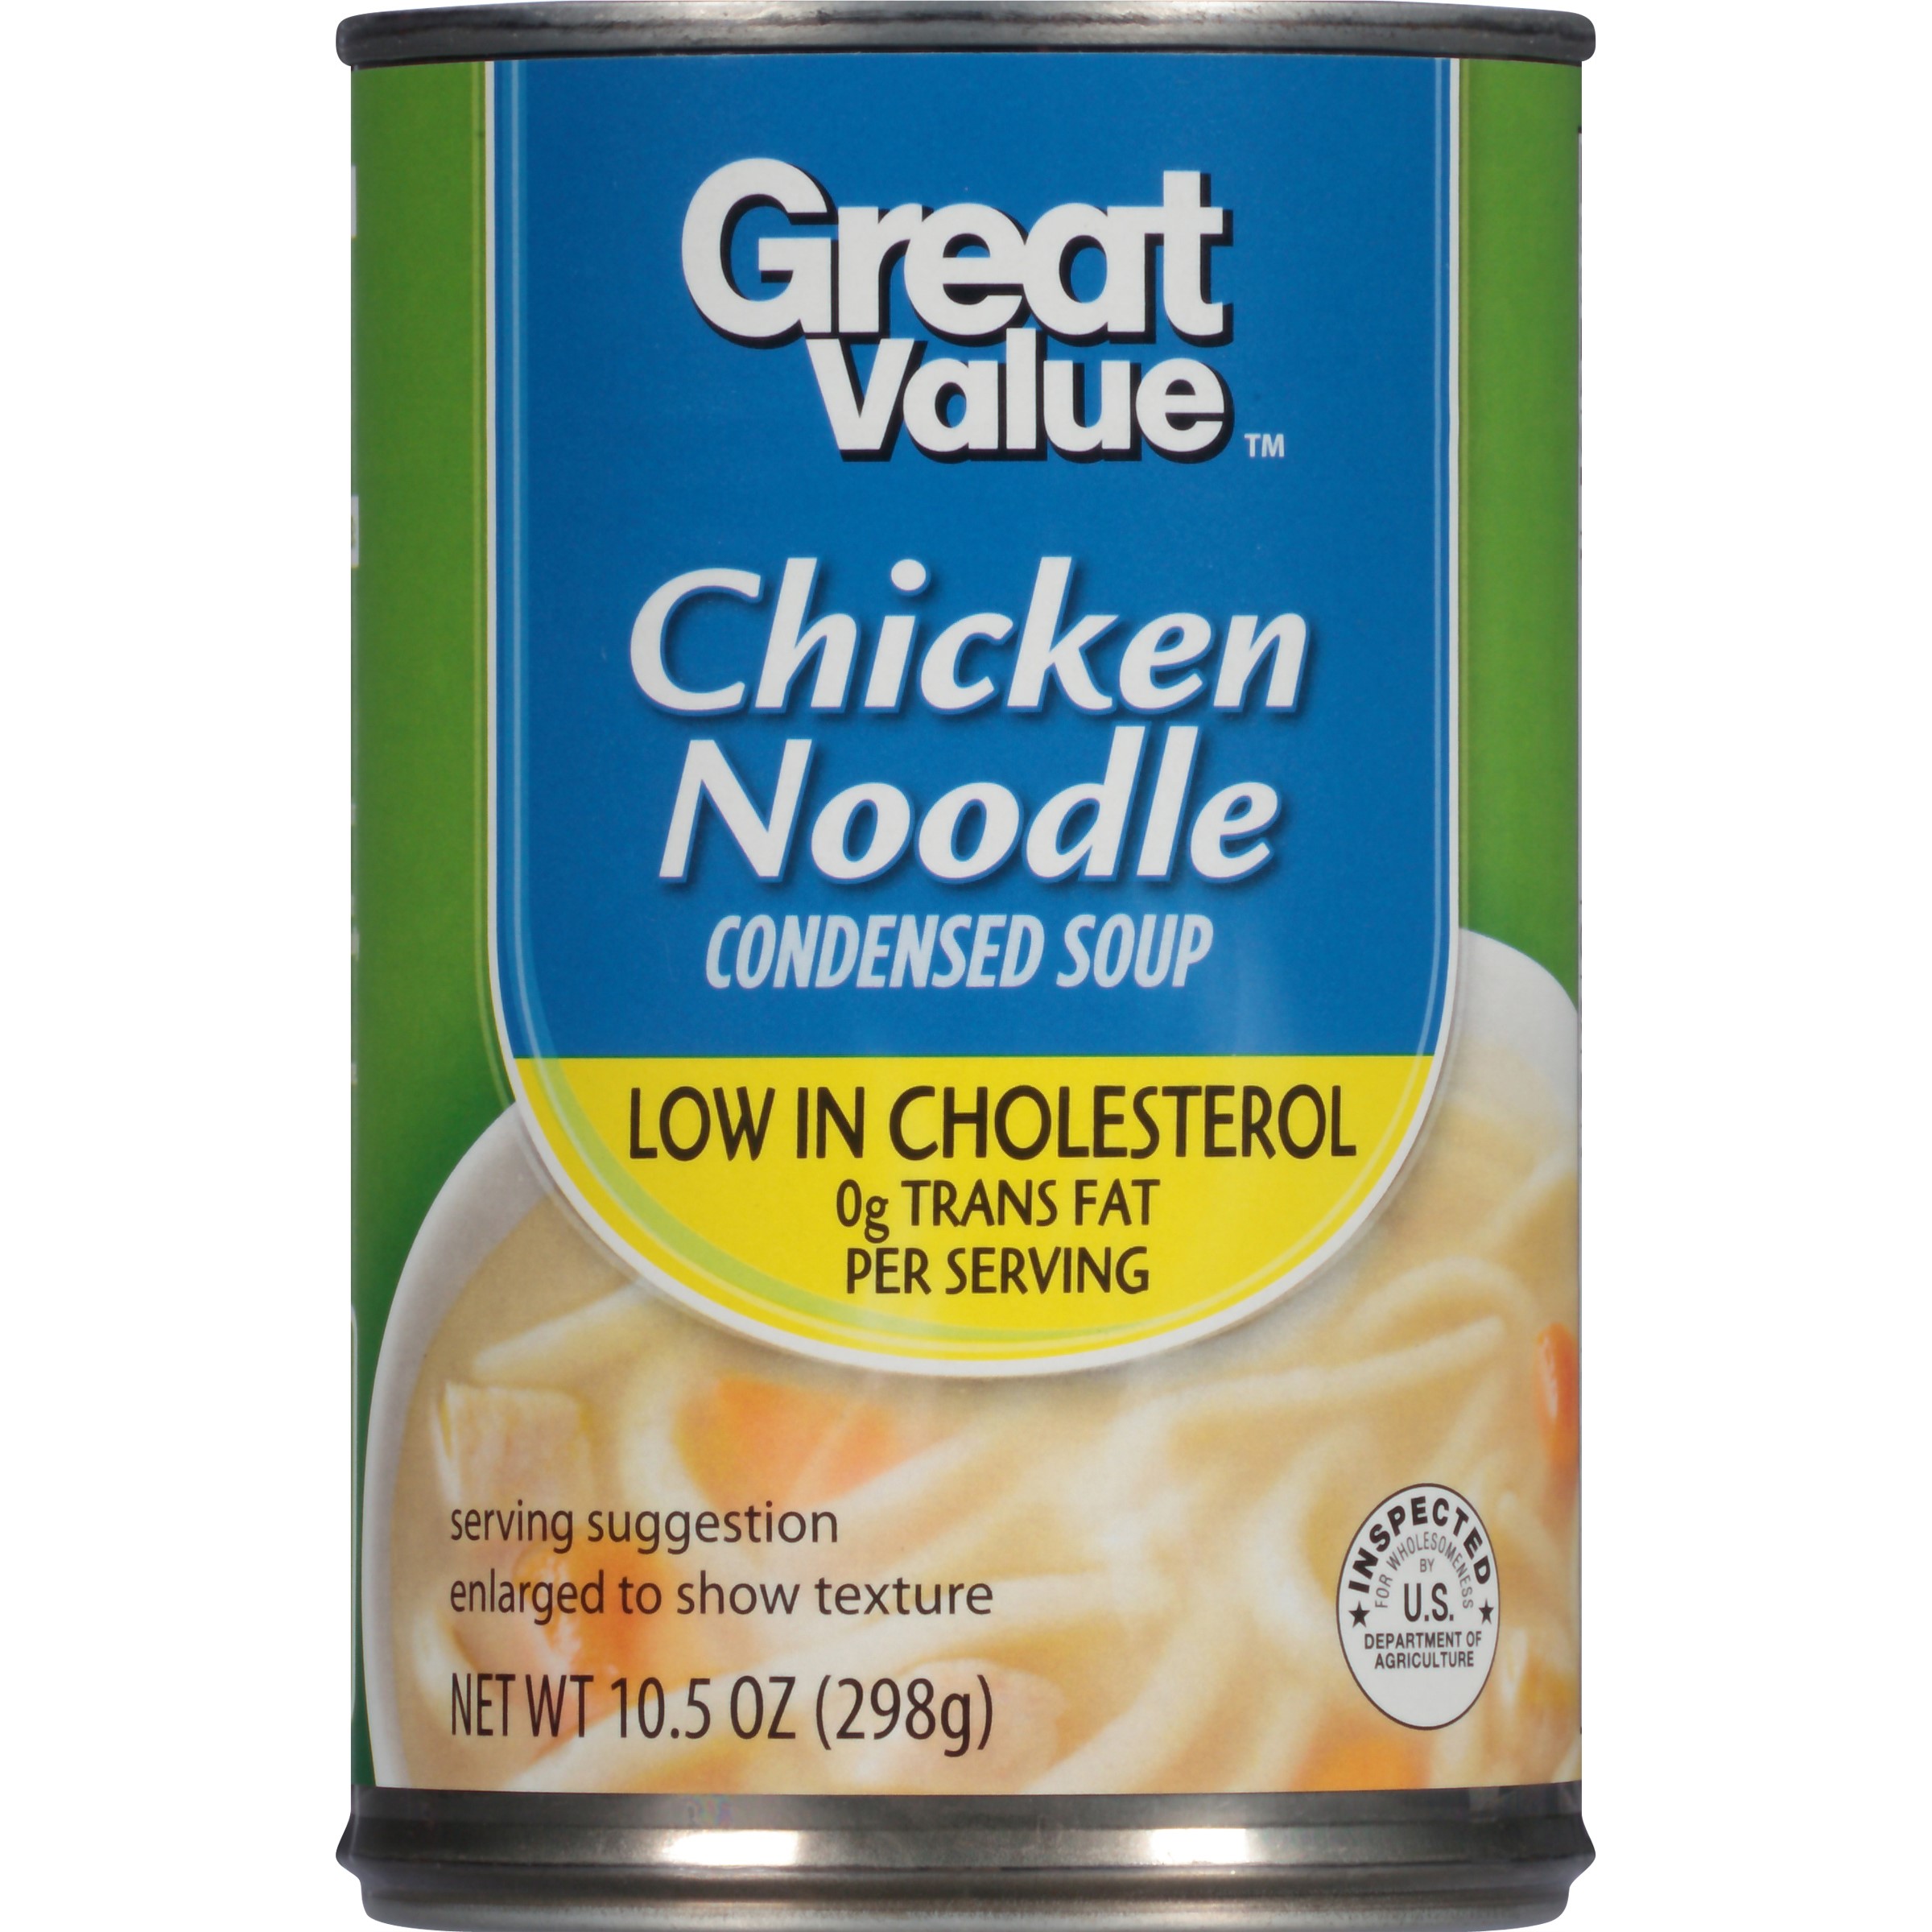 (8 Pack) Great Value Chicken Noodle Condensed Soup, 10.5 Oz